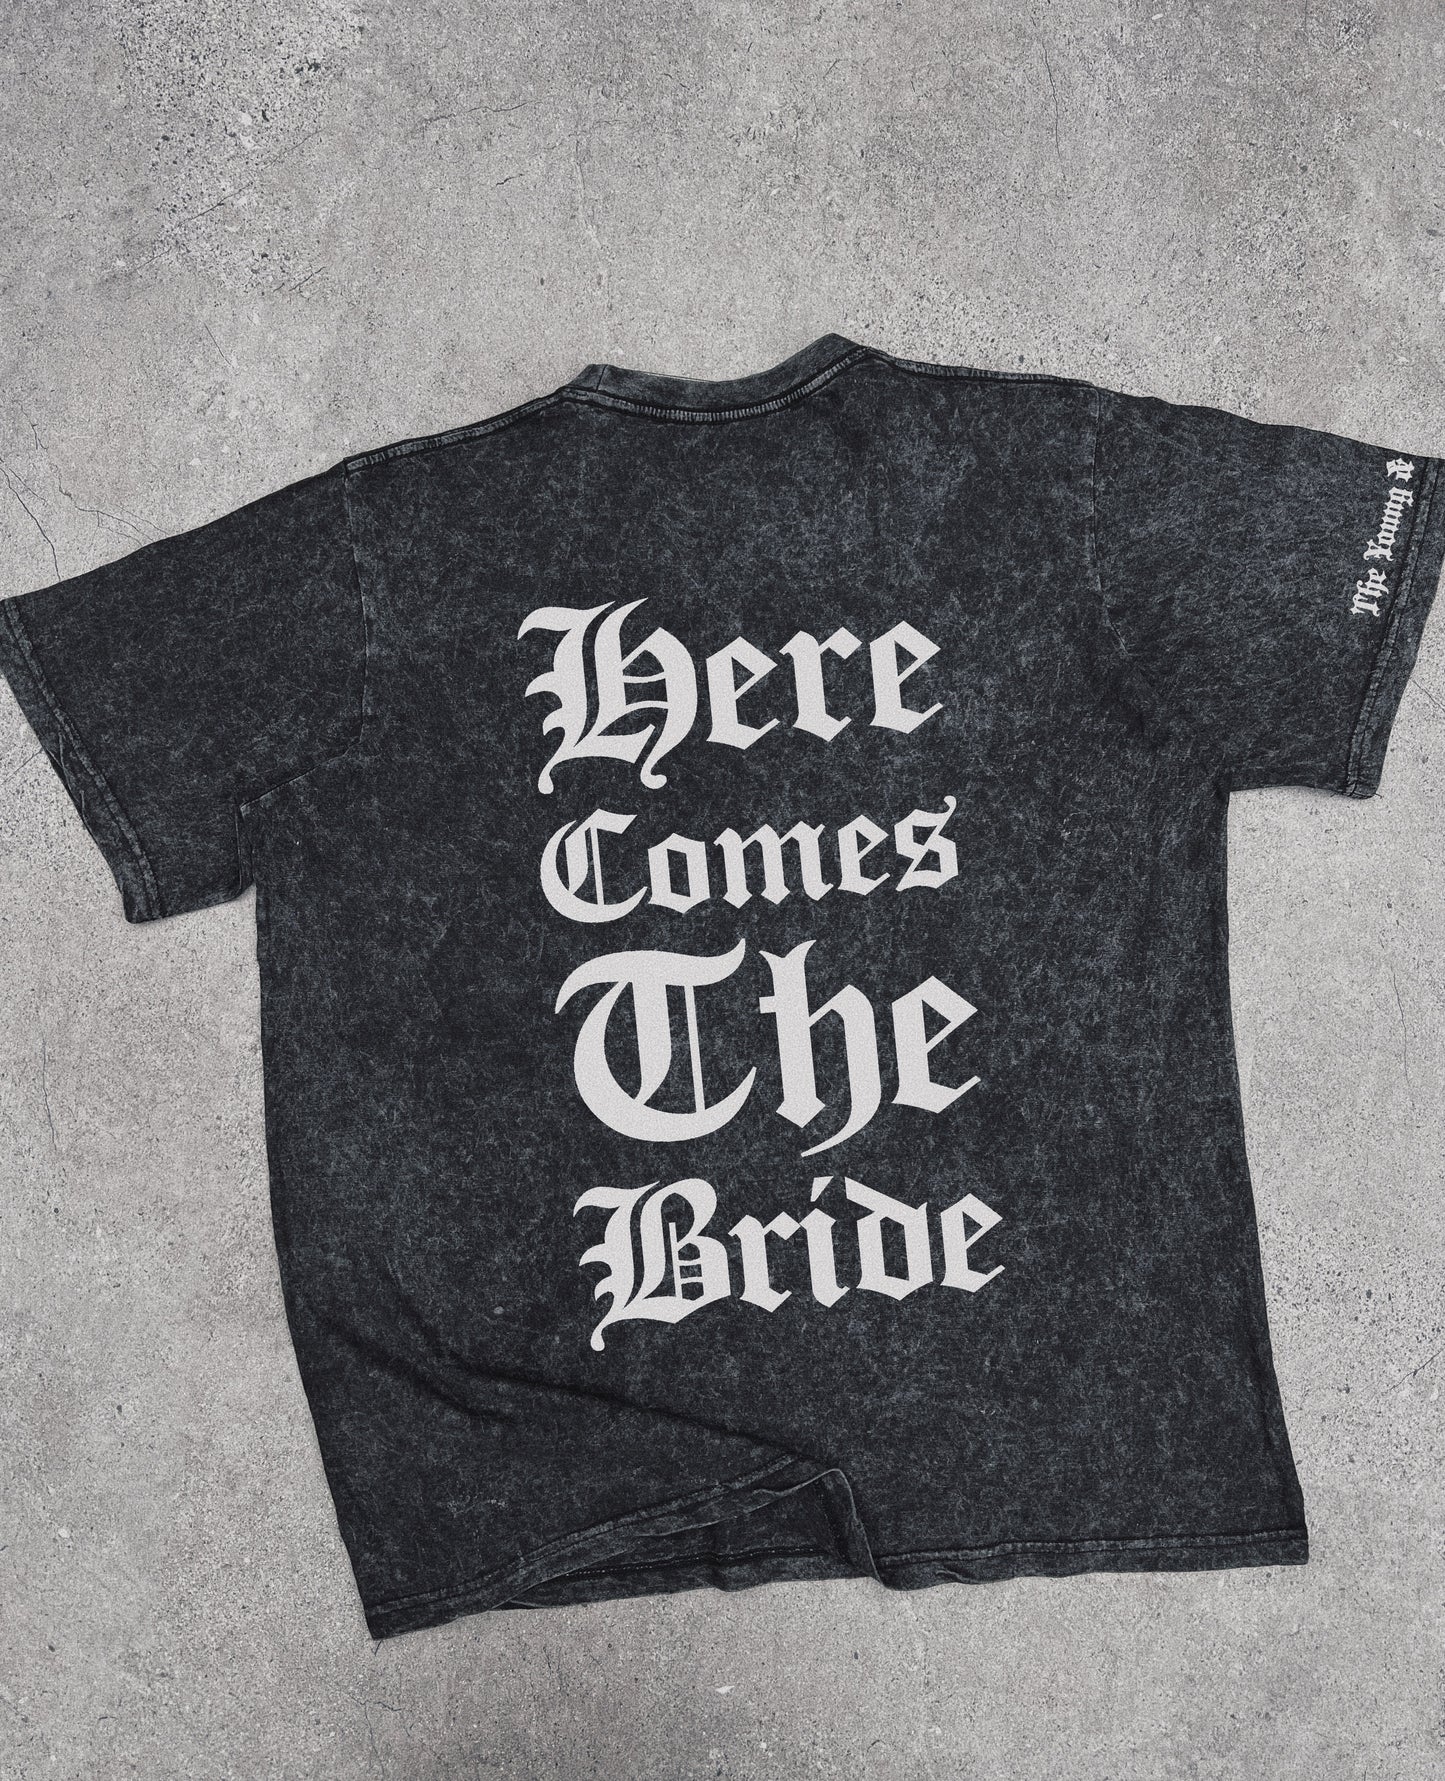 Here Comes The Bride - T-Shirt